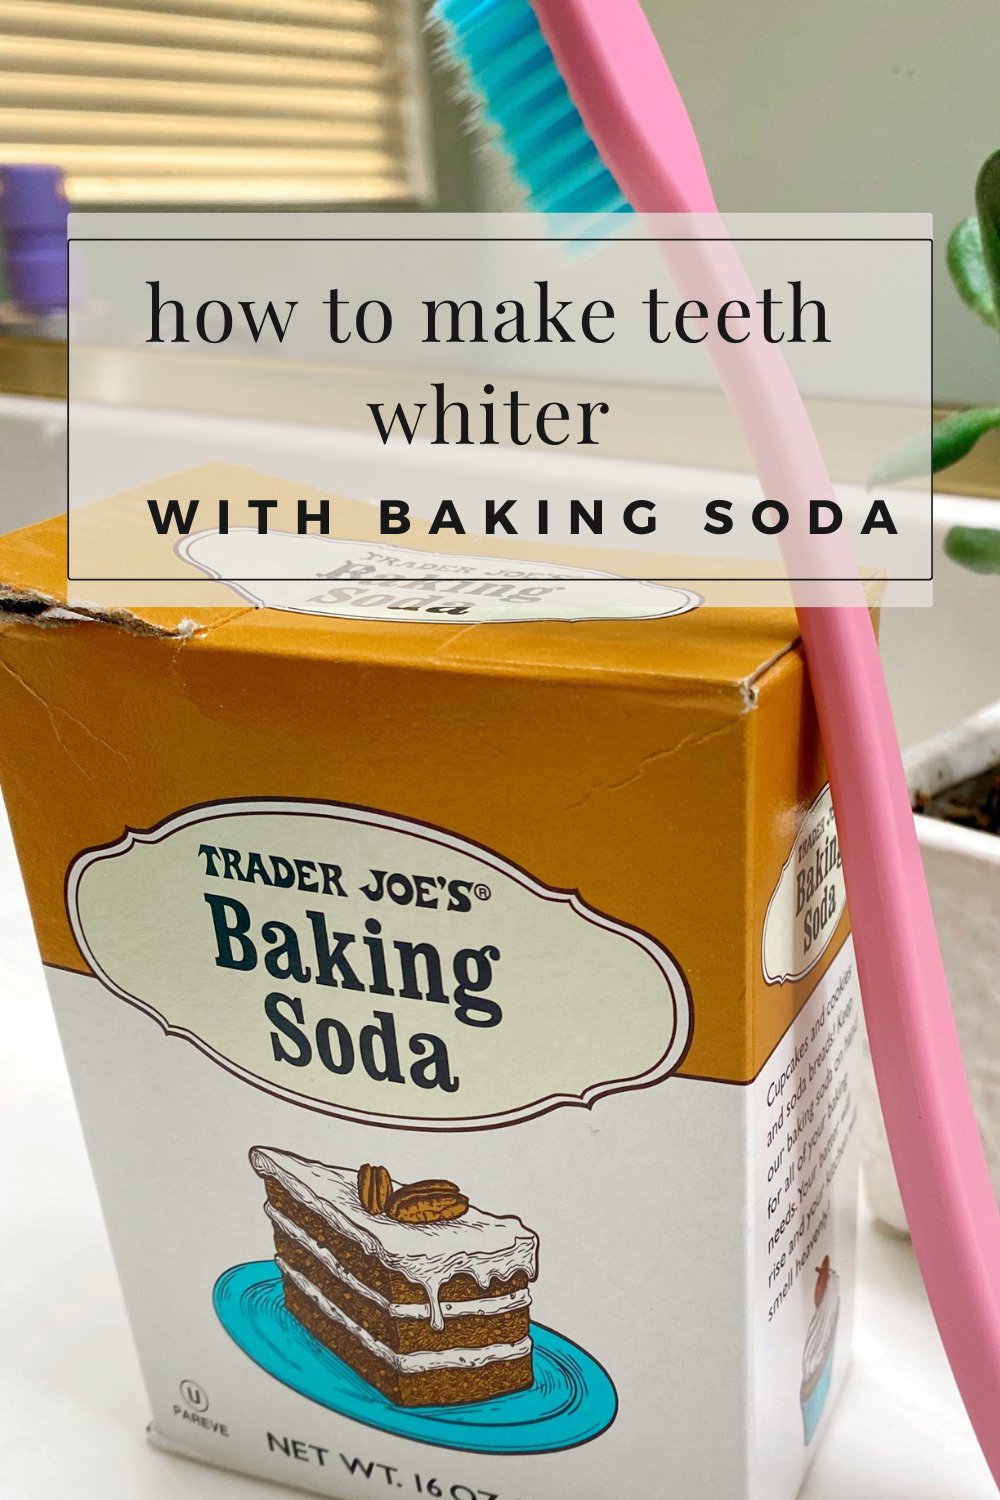 How To Make Teeth Whiter With Baking Soda